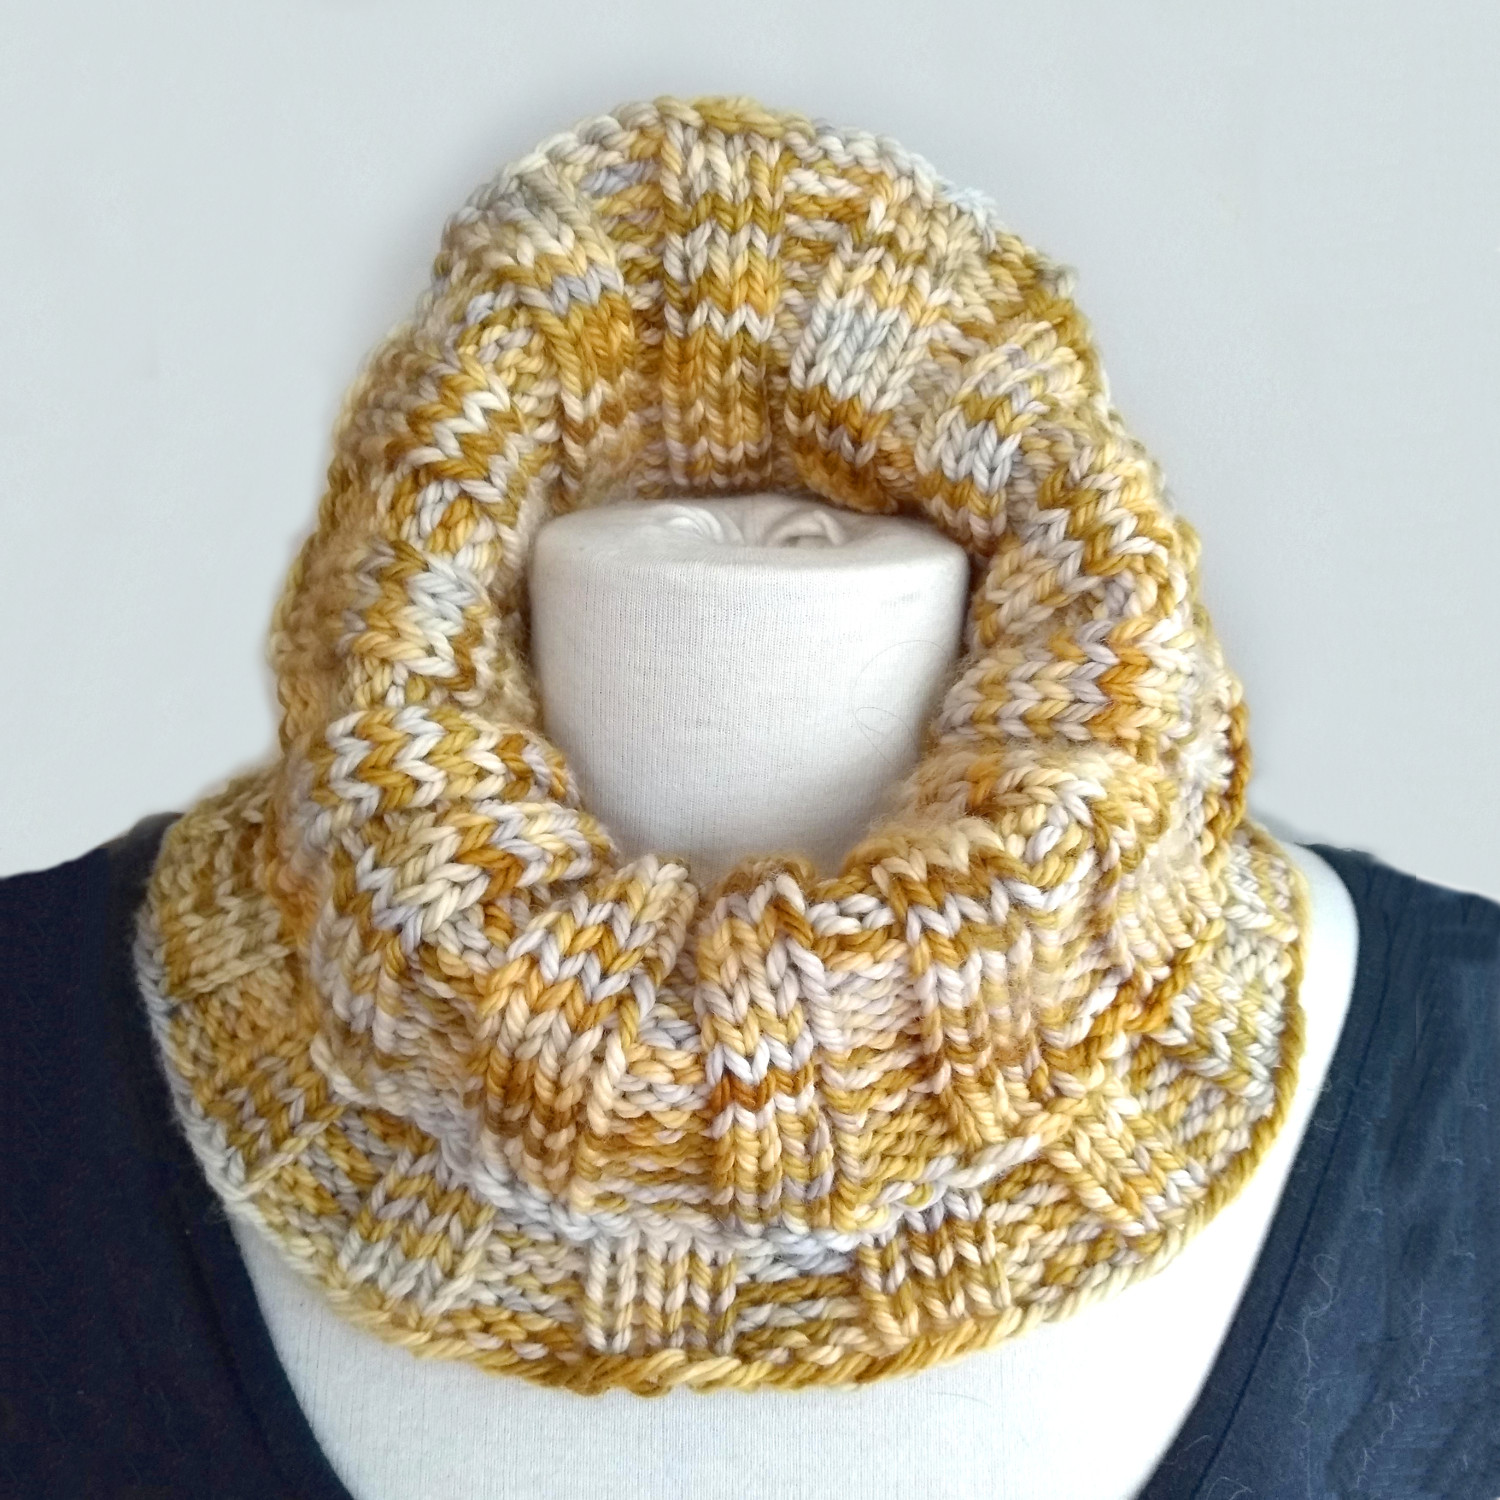 Chunky cowl worn higher up the neck